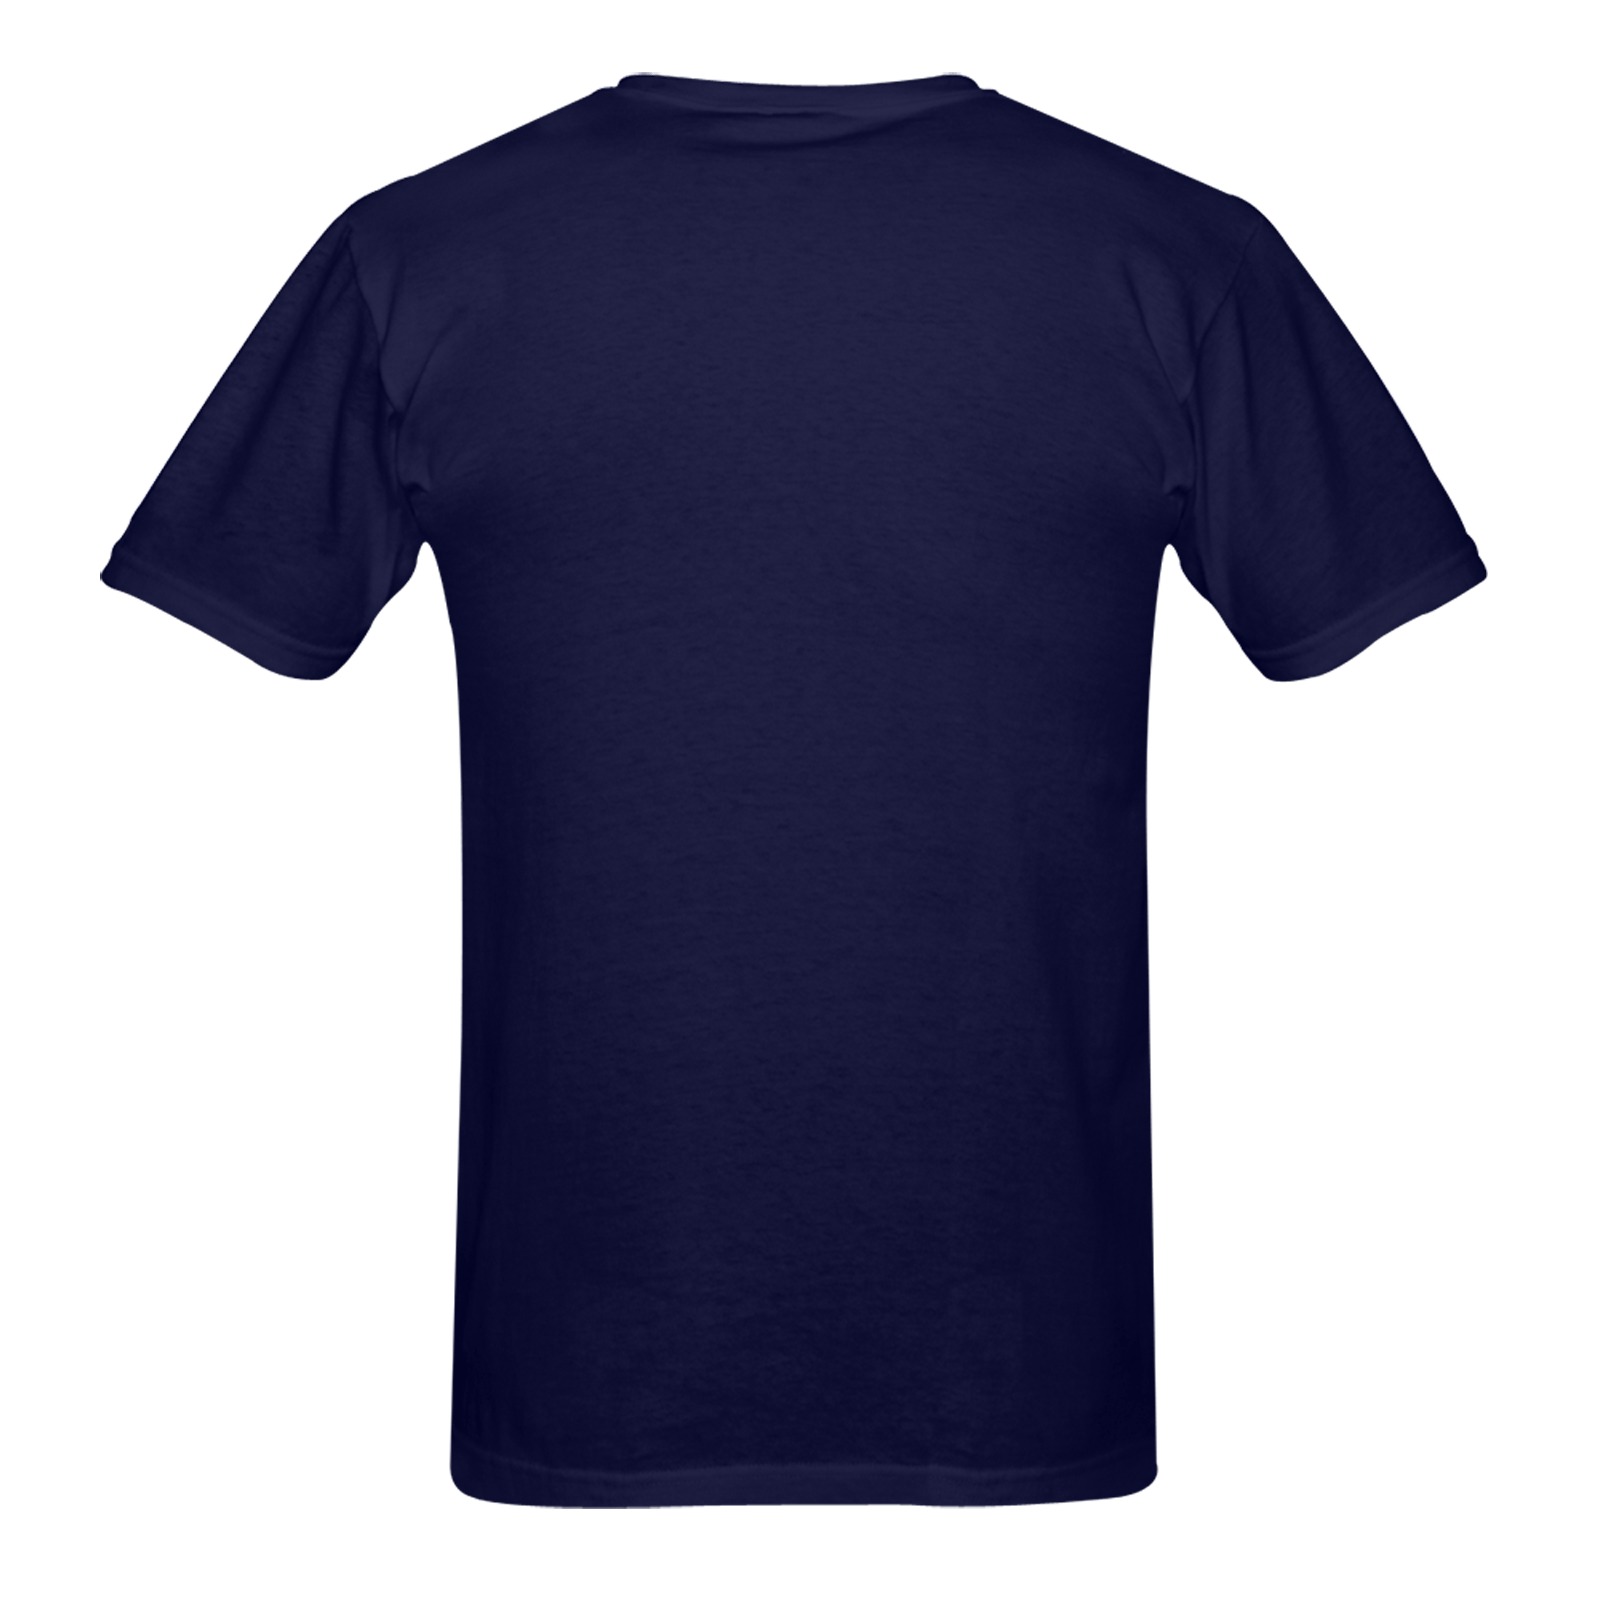 Navy - Men's Heavy Cotton T-Shirt (One Side Printing)